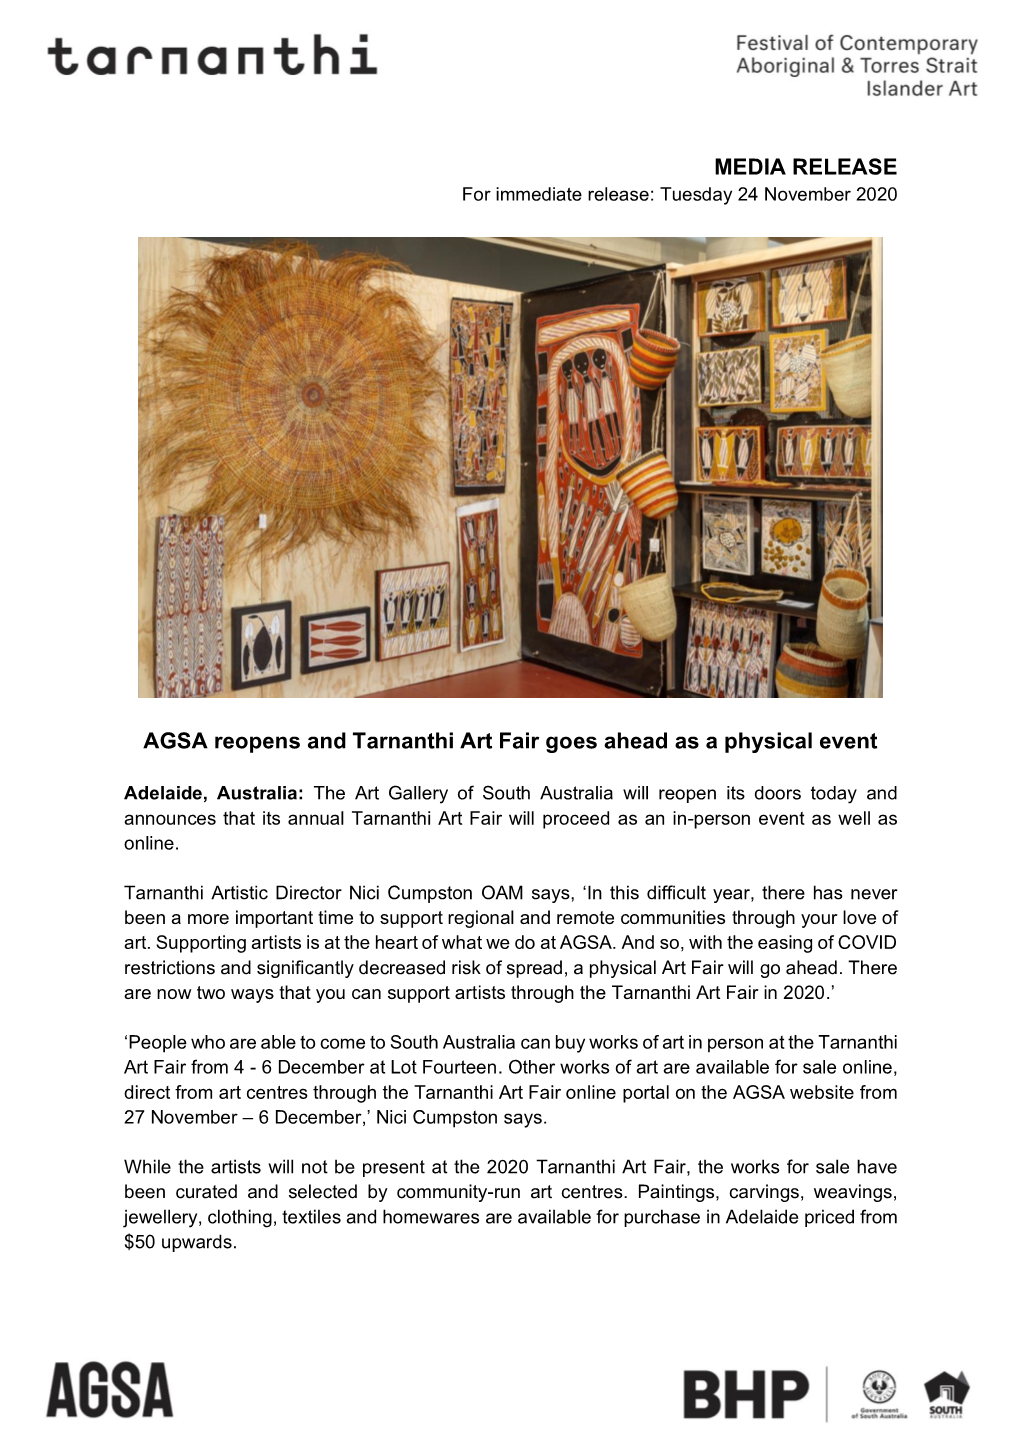 MEDIA RELEASE AGSA Reopens and Tarnanthi Art Fair Goes Ahead As A